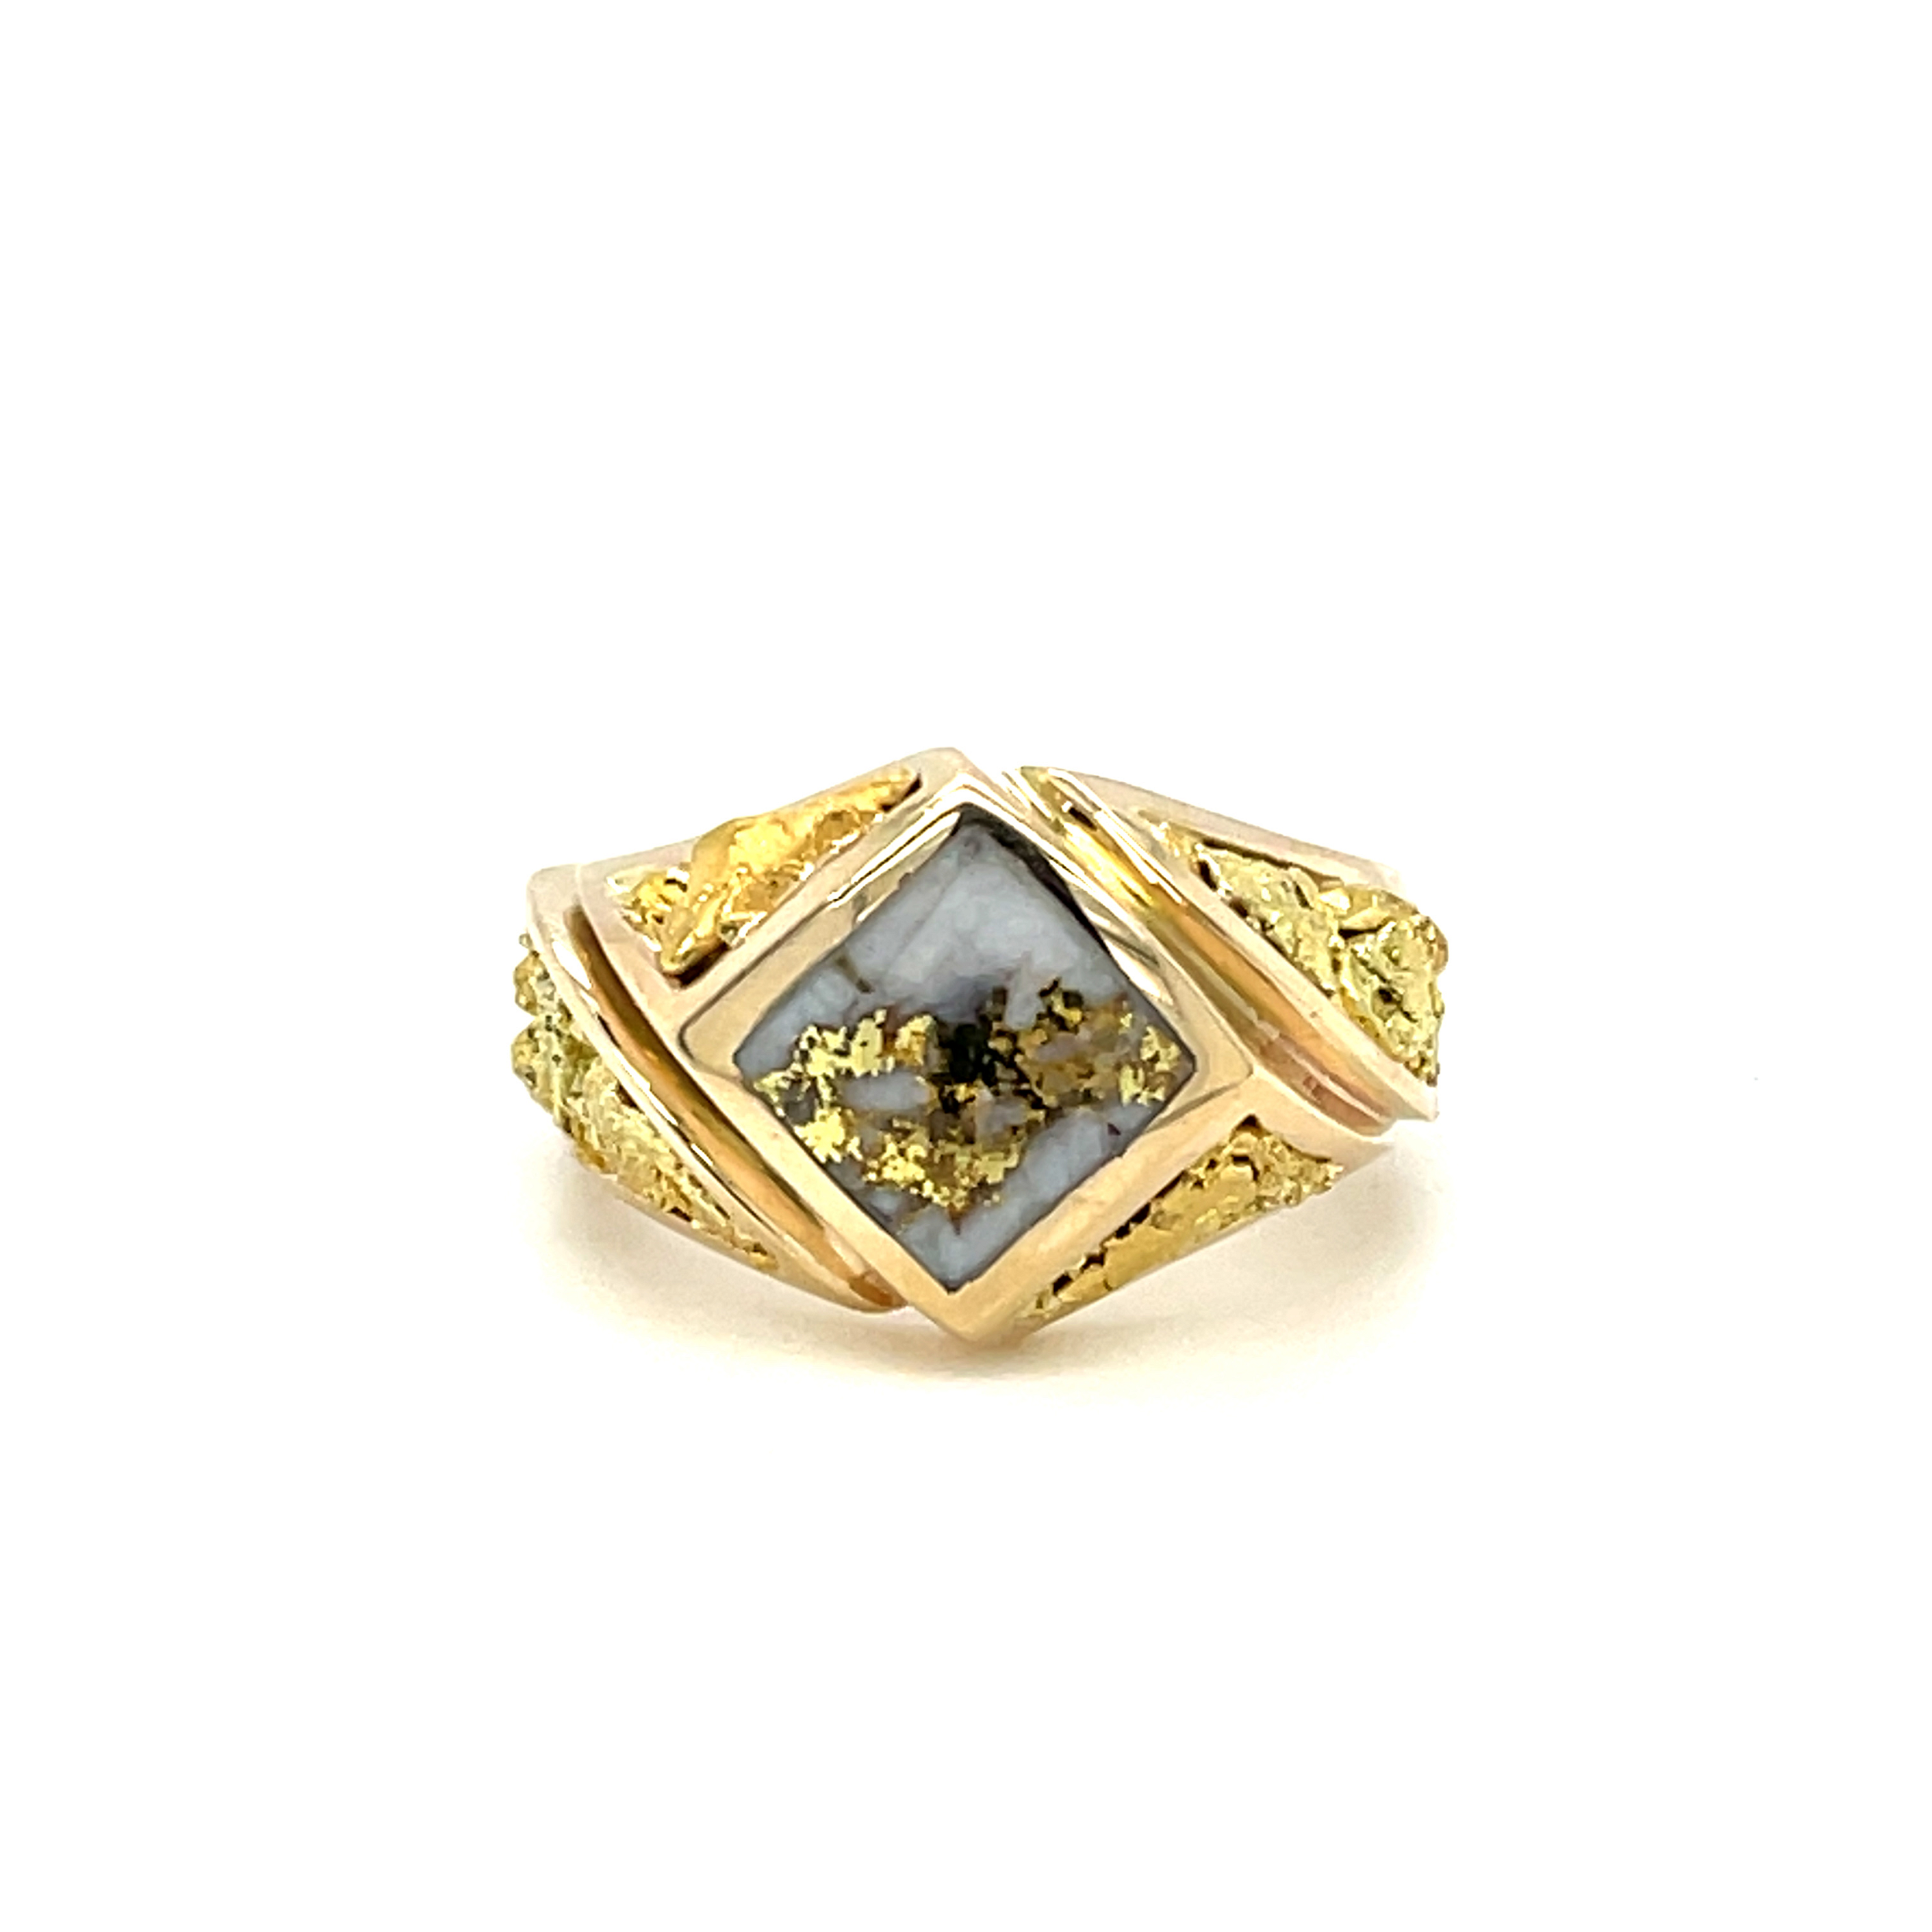 14k YG w/ Gold Quartz and Gold Nugget Ring by Peter Fisher